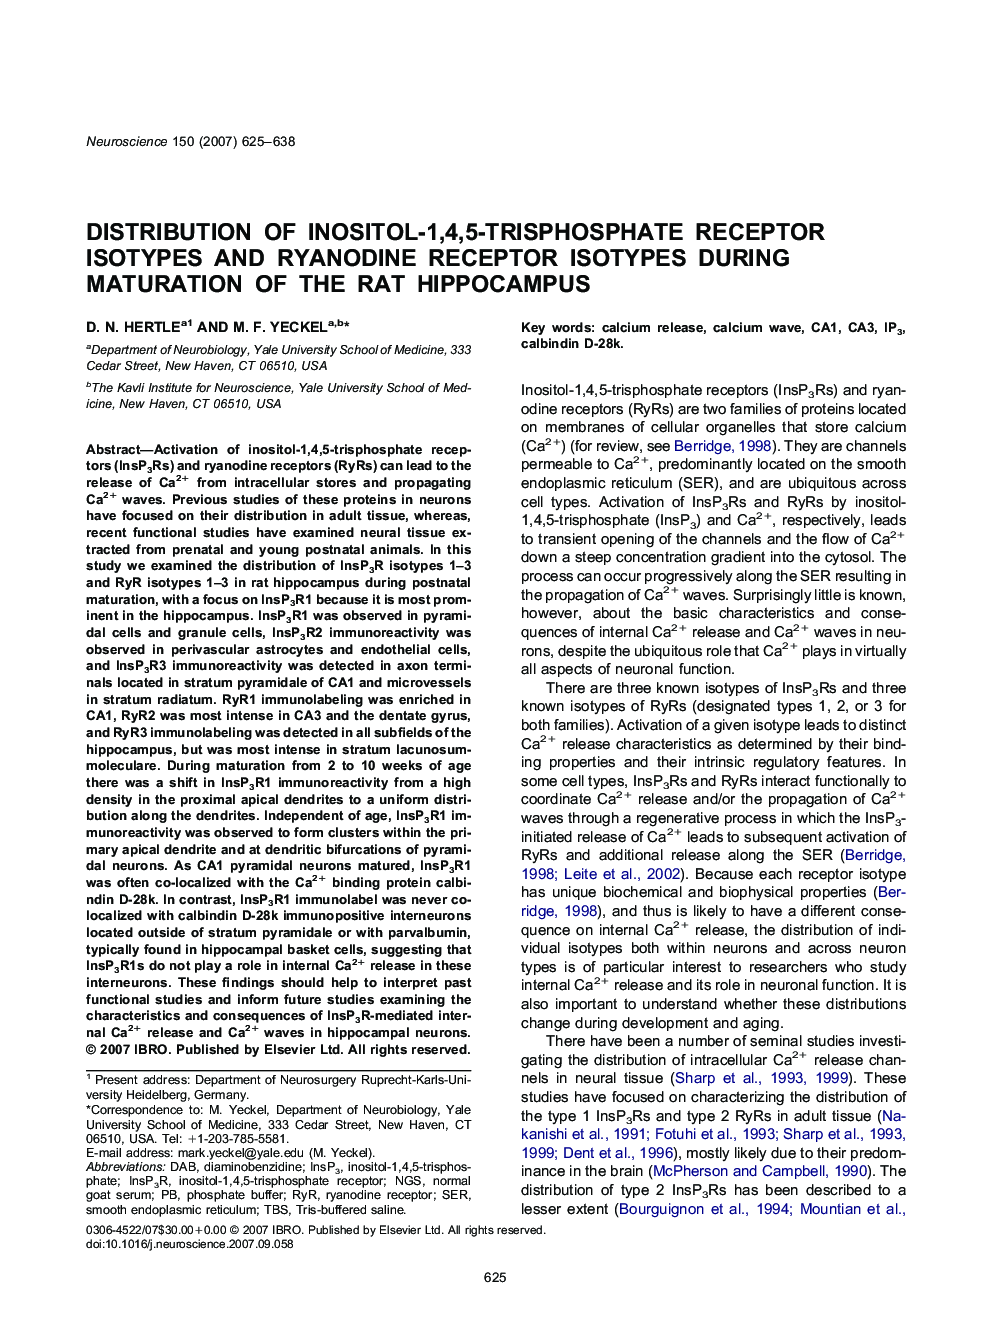 Distribution of inositol-1,4,5-trisphosphate receptor isotypes and ryanodine receptor isotypes during maturation of the rat hippocampus